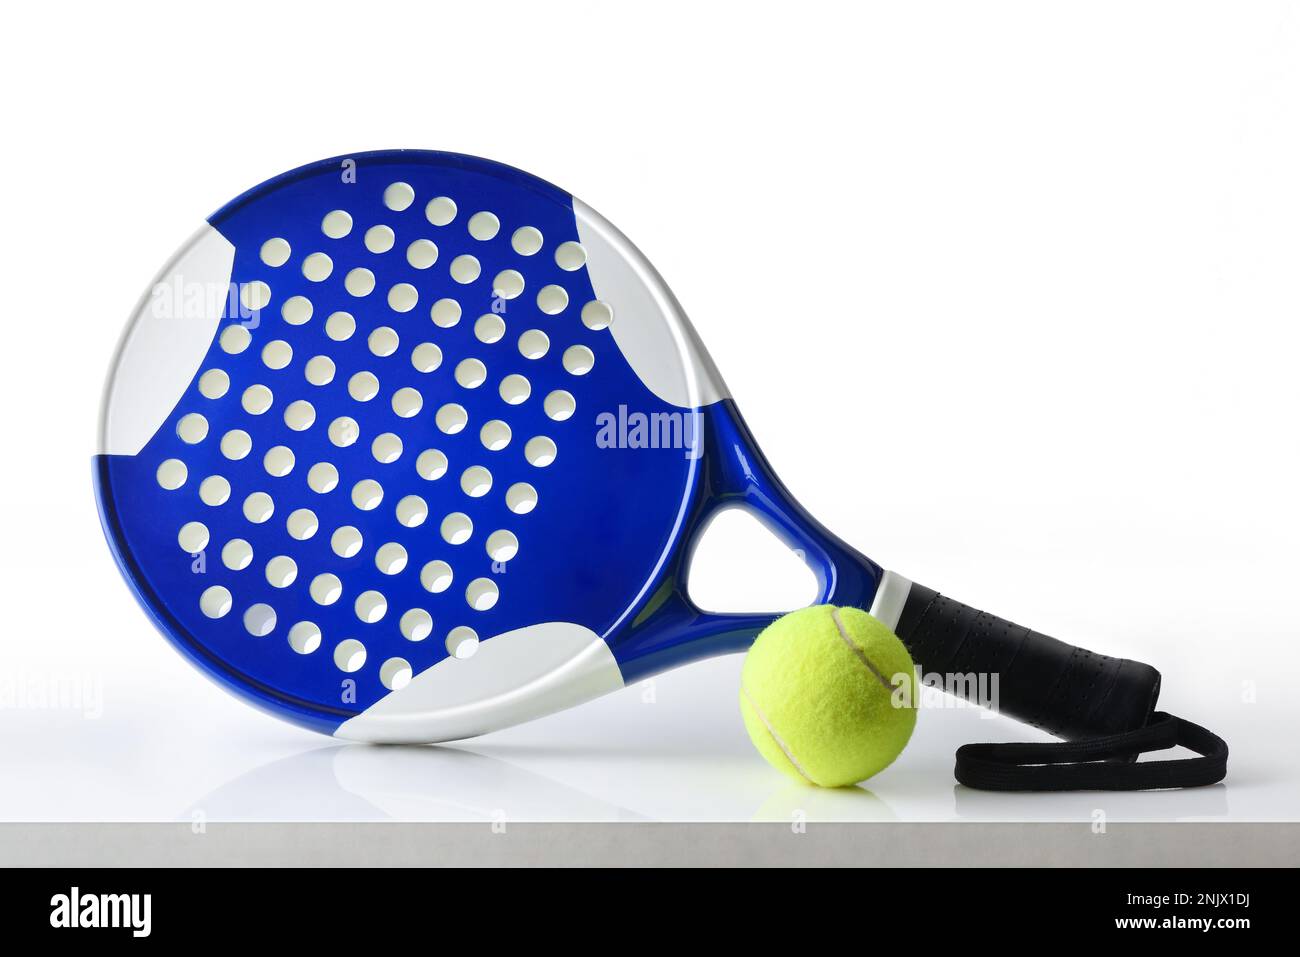 Padel racket and ball reflected on white table and white isolated background. Front view. Stock Photo